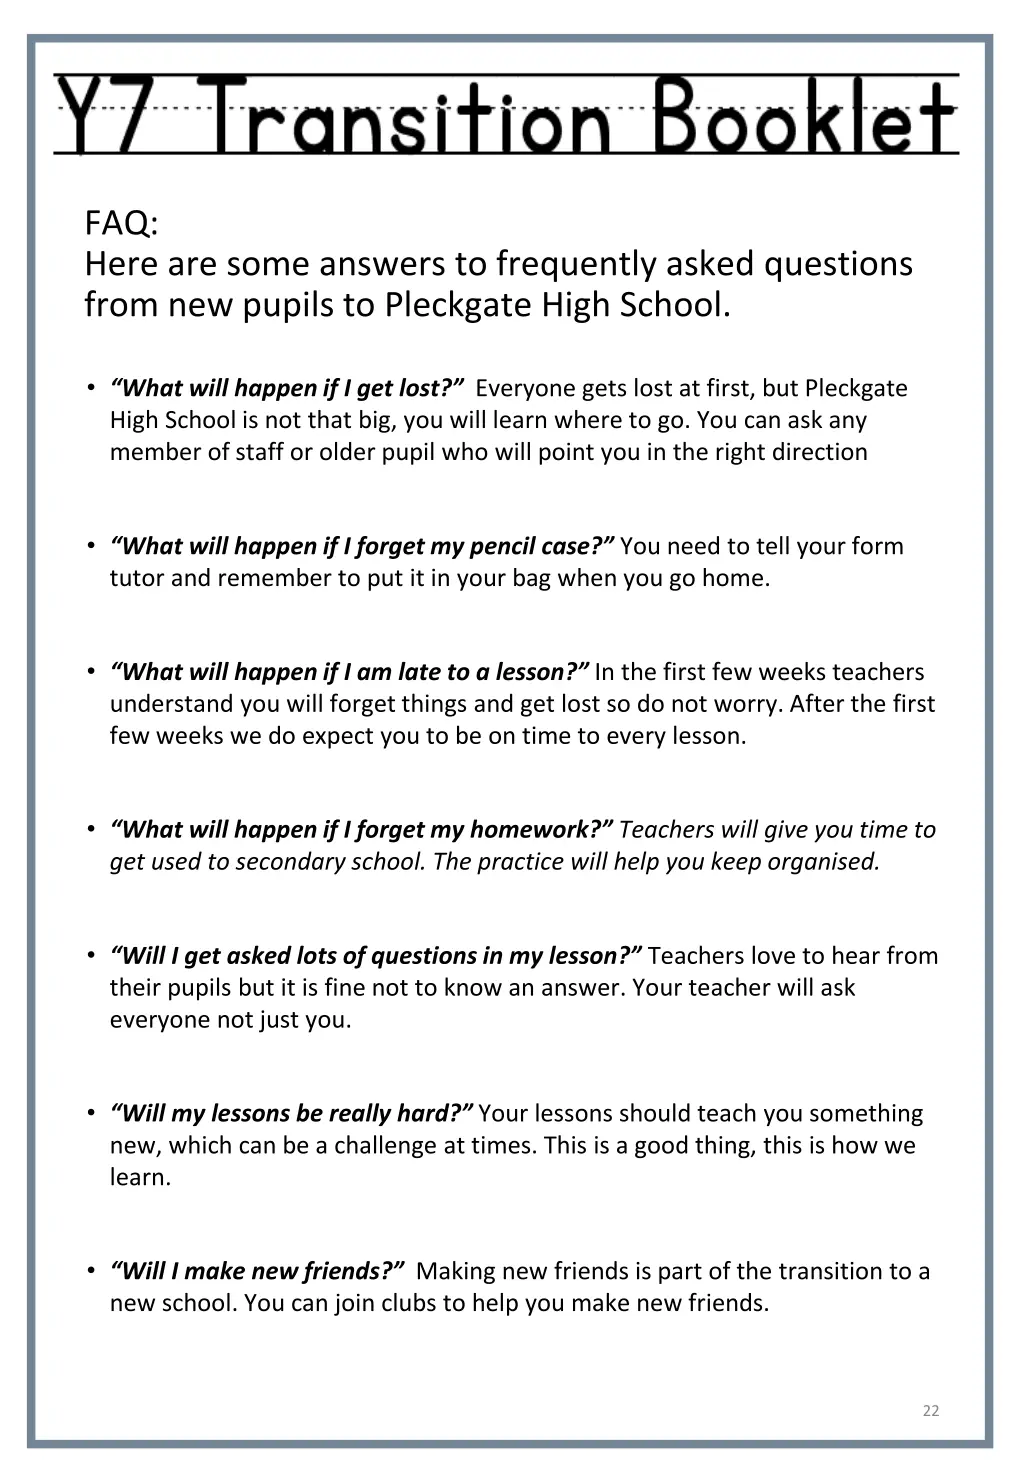 faq here are some answers to frequently asked